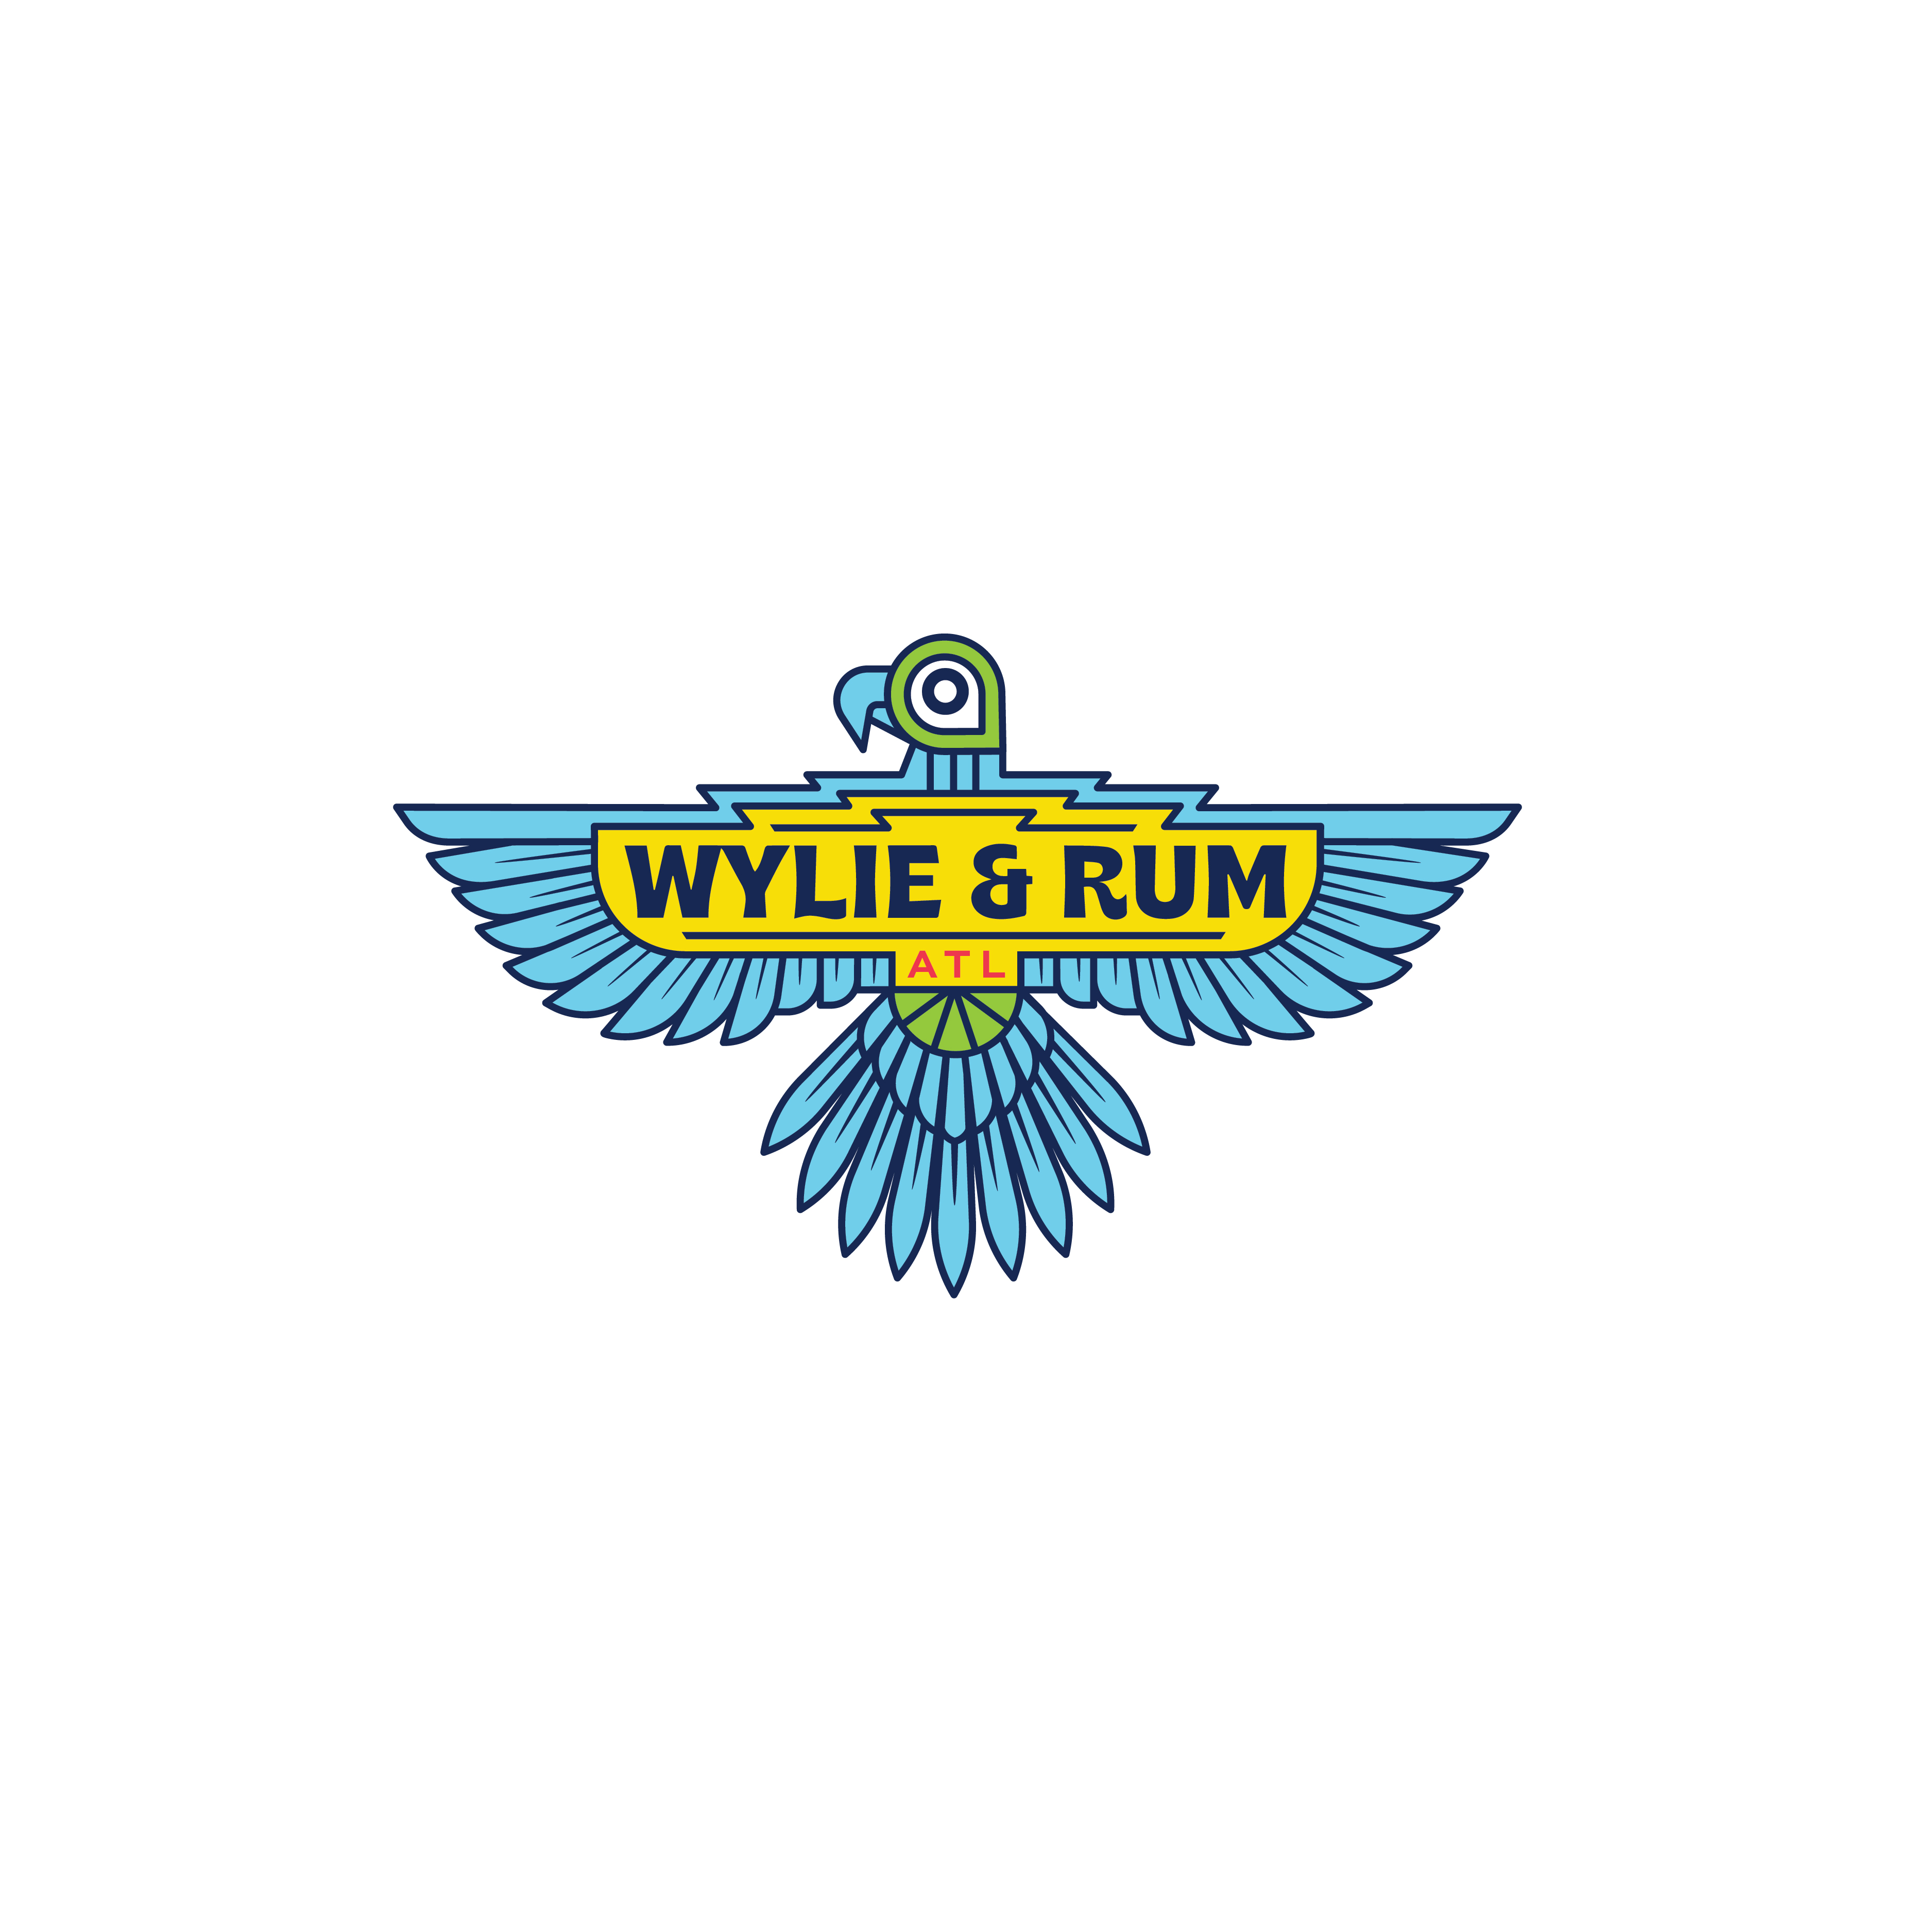 Wylie & Rum logo design by logo designer Steely Works for your inspiration and for the worlds largest logo competition